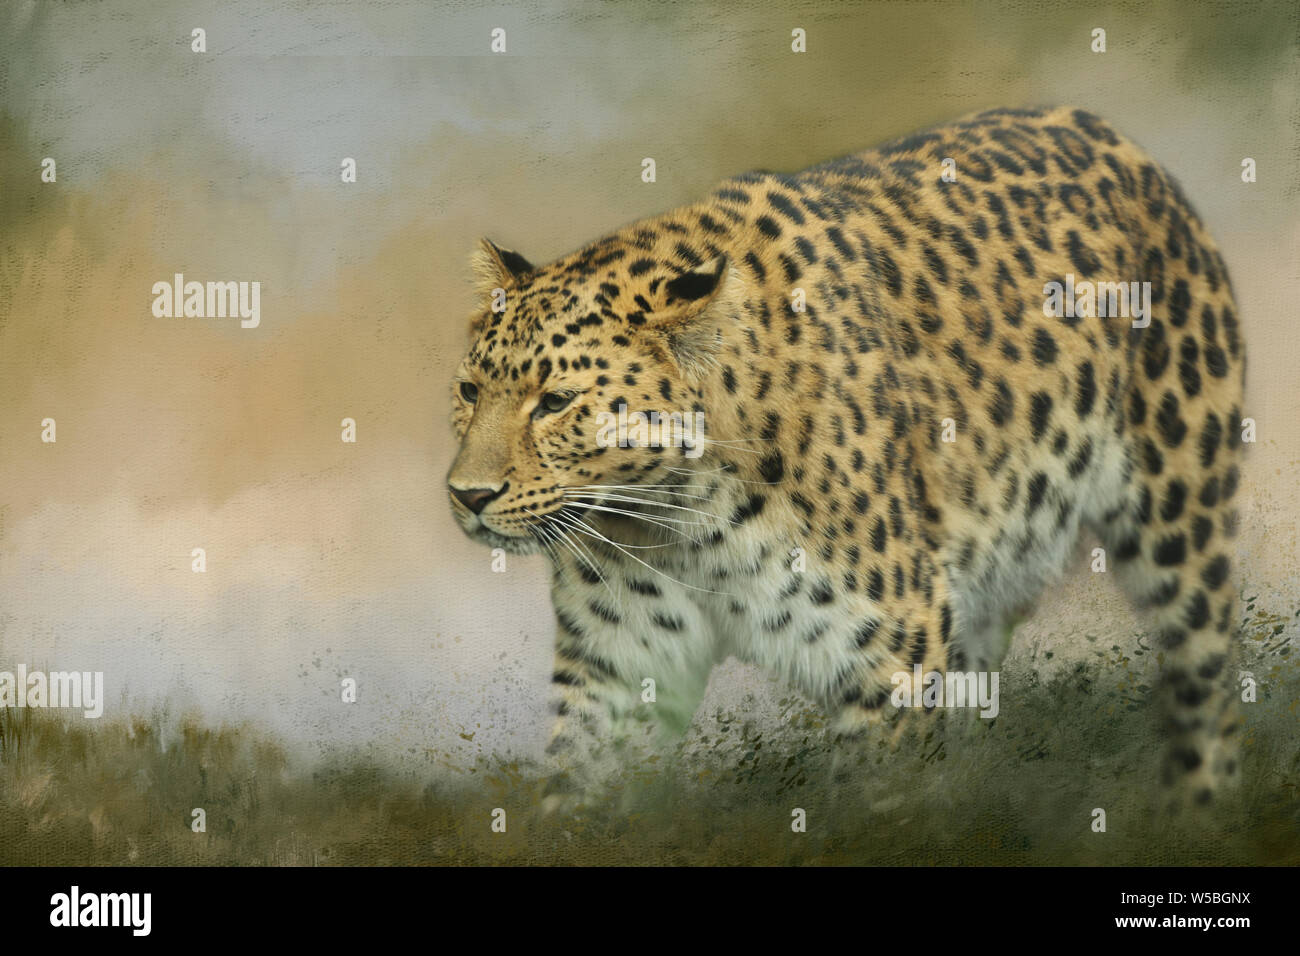 Rare Amur Leopard on the prowl at the Yorkshire Wildlife Park. Background given a textured neutral look with a space for text Stock Photo